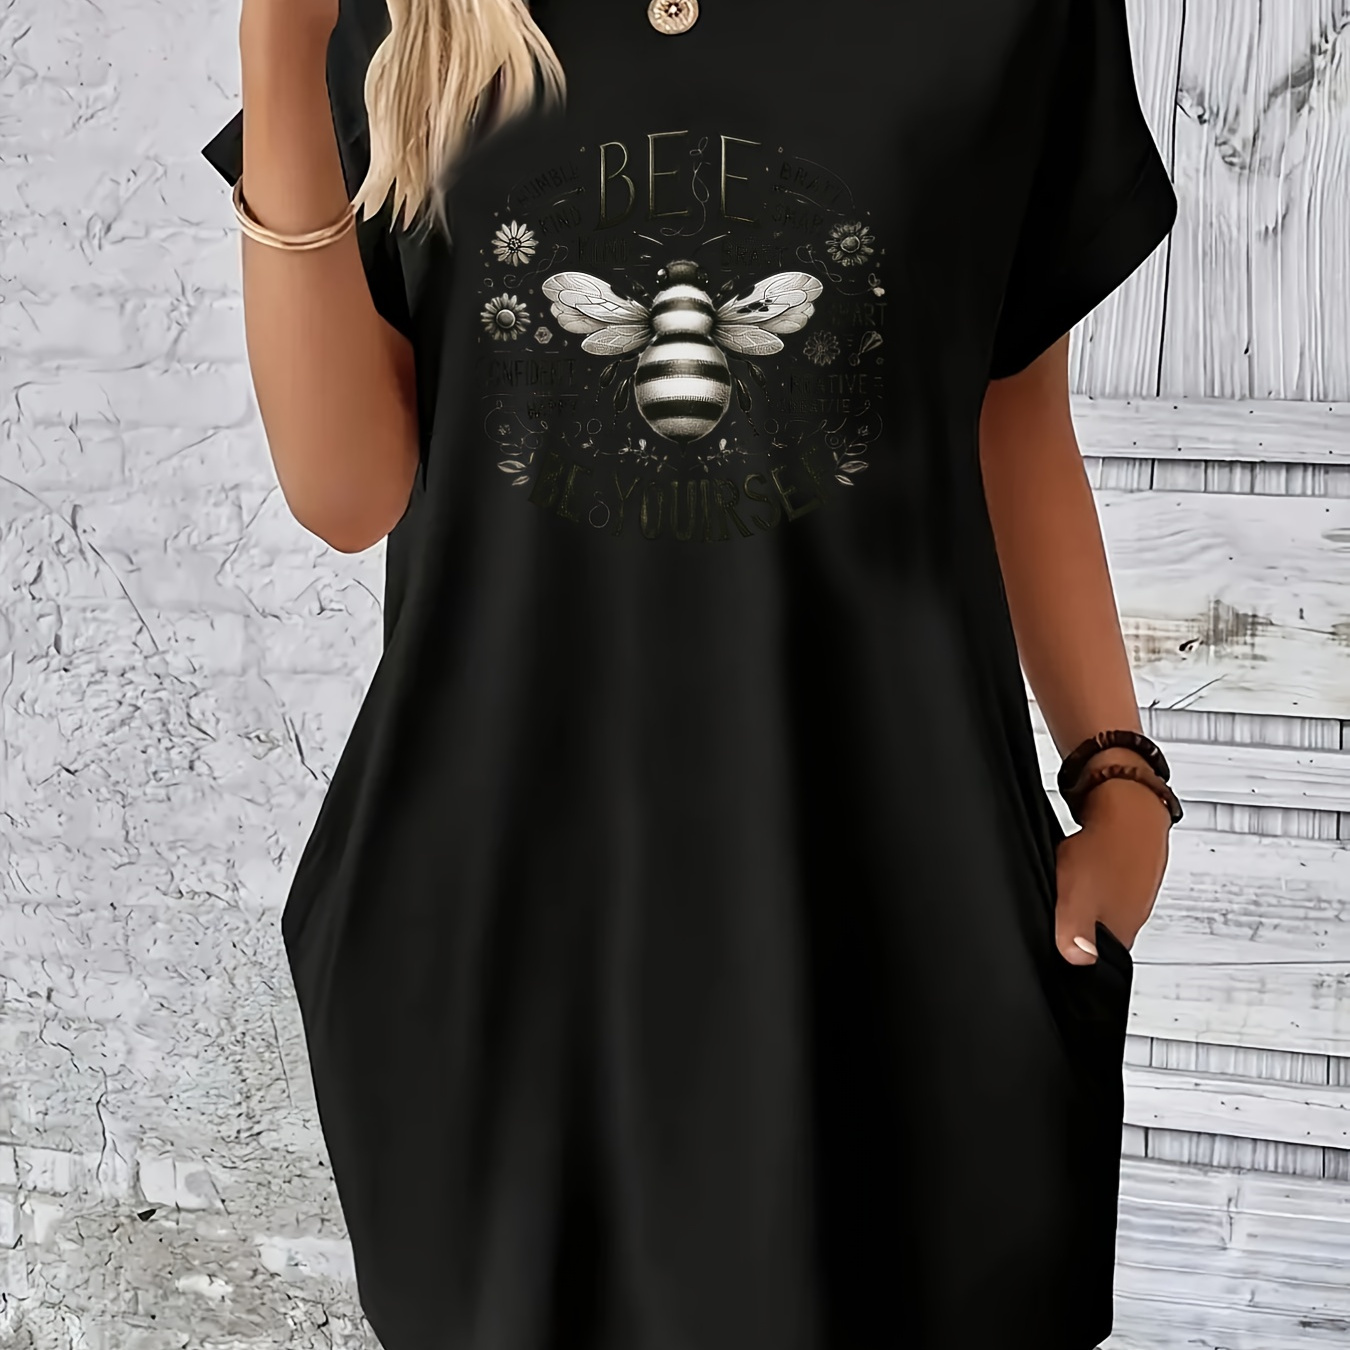 

Bee Print Tee Dress, Short Sleeve Crew Neck Casual Dress For Summer & Spring, Women's Clothing